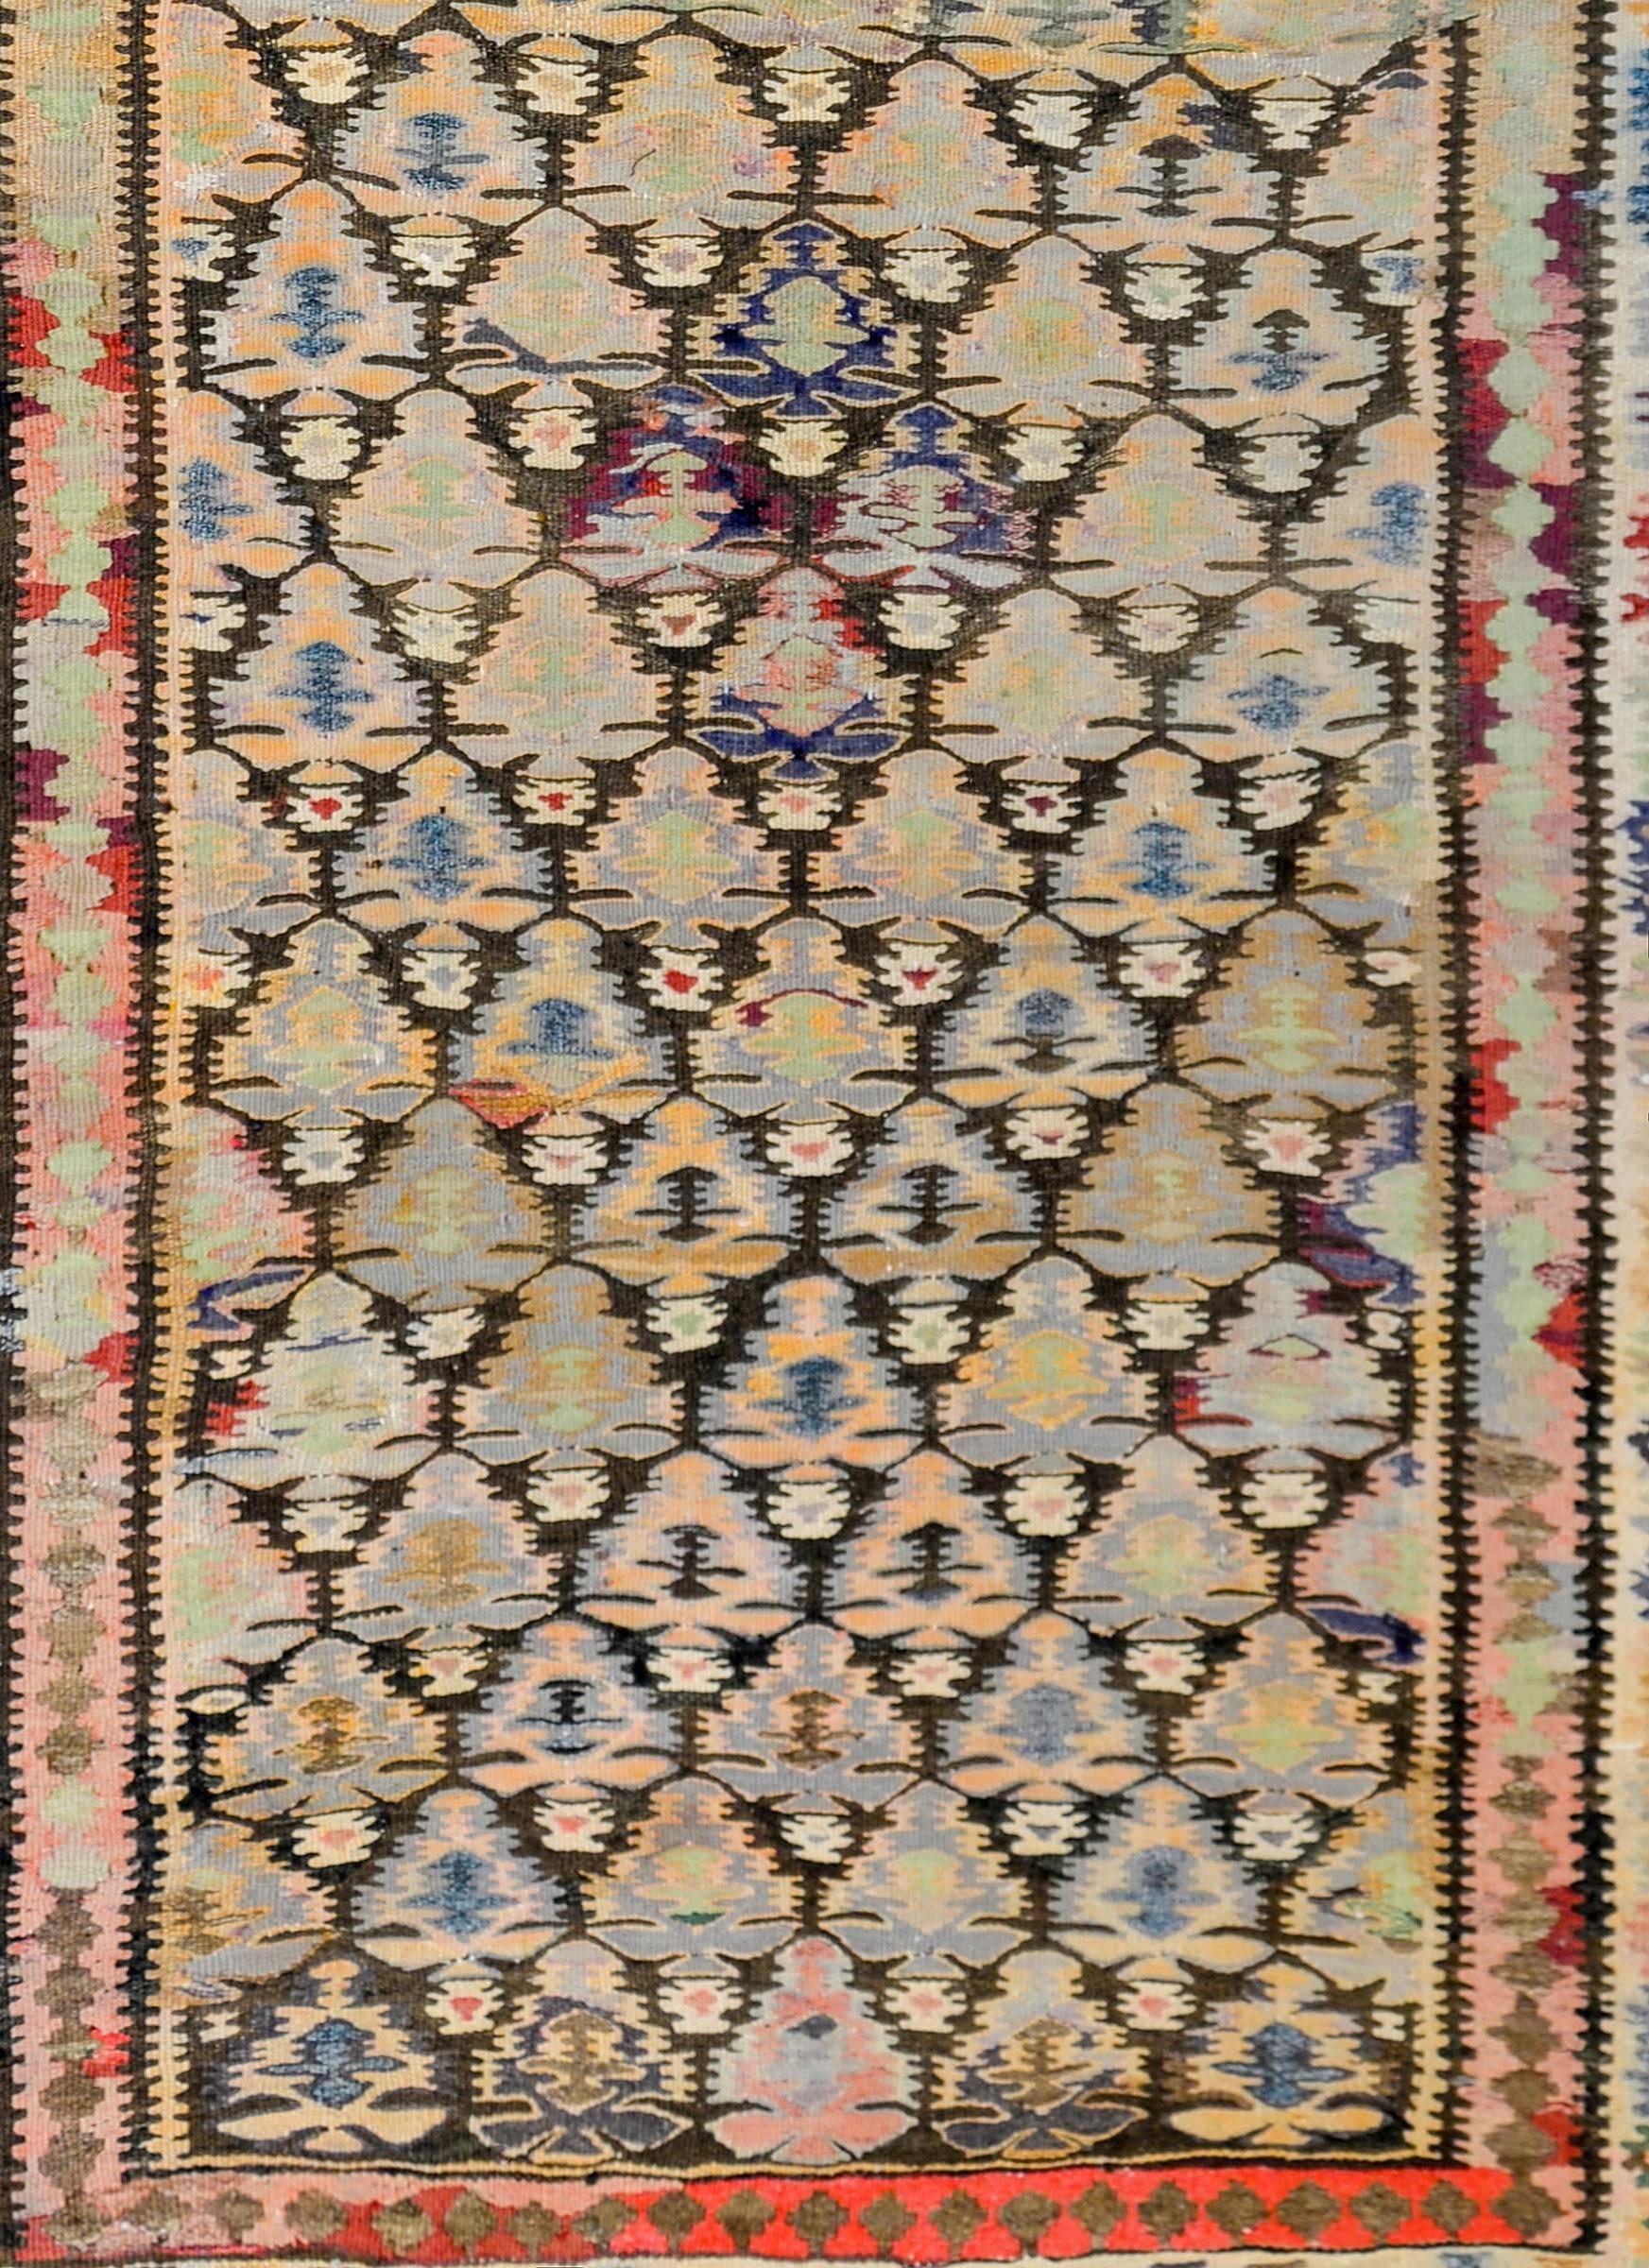 An early 20th century Persian Qazvin Kilim runner with an all-over tree-of-life pattern woven in a complex color scheme of indigo, crimson, gold, brown, and cream colored wool surrounded by a border with a stylized petite floral central stripe